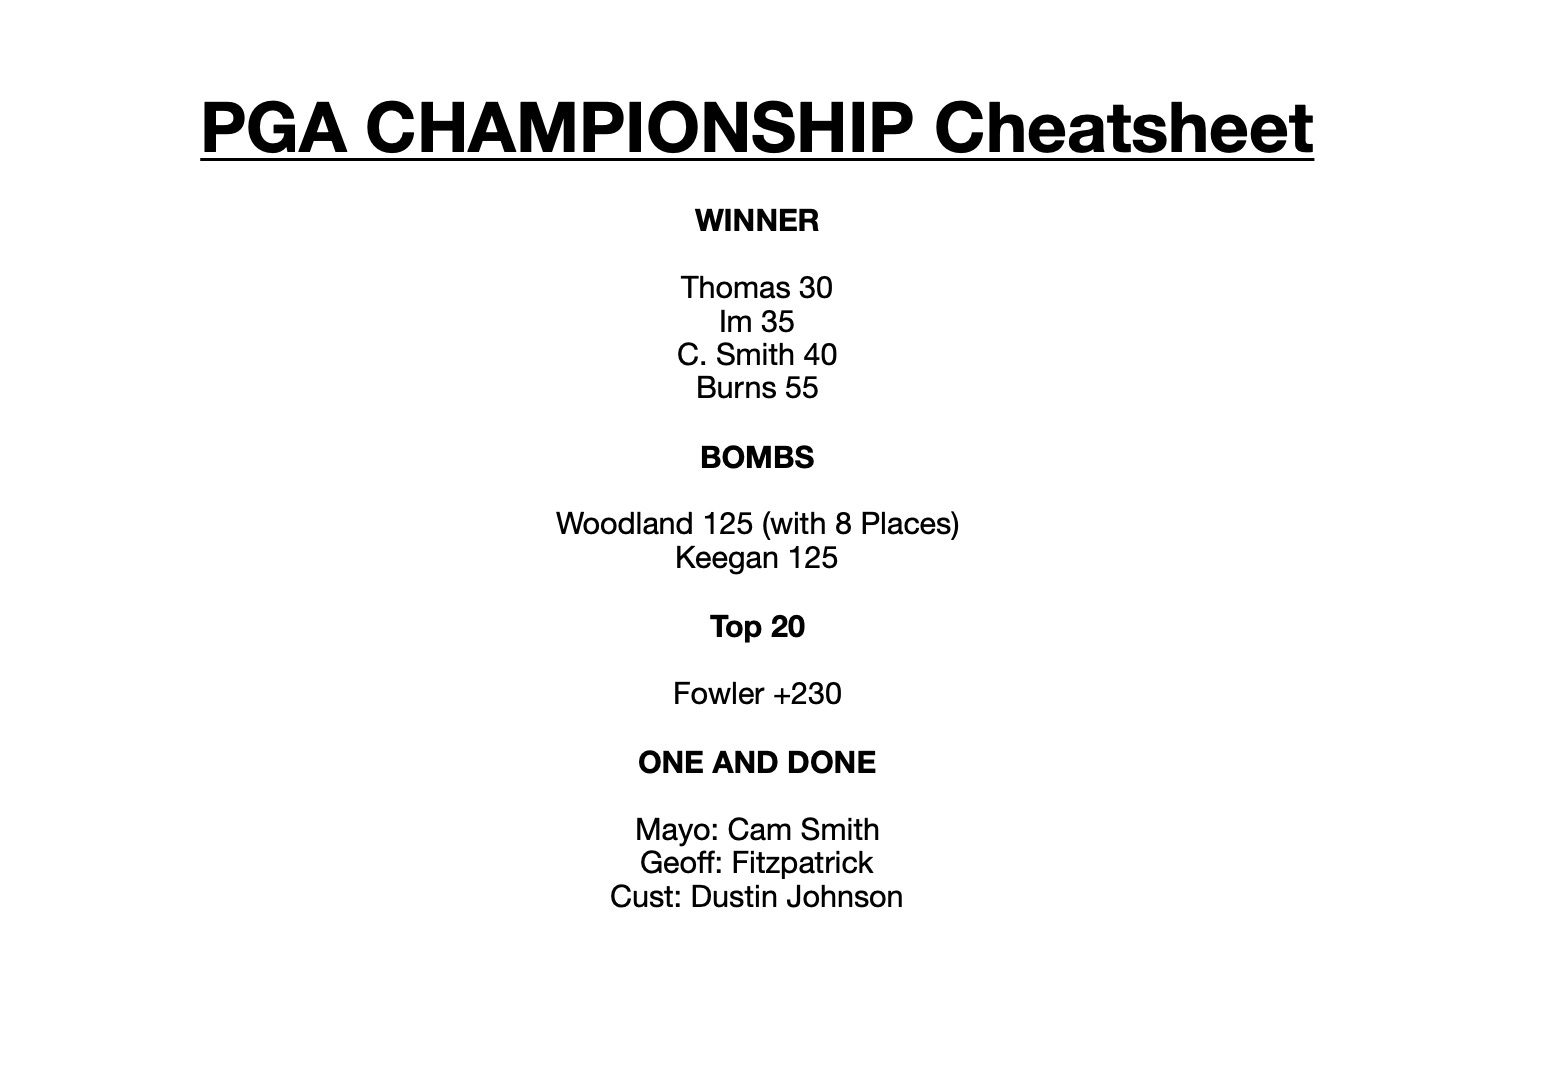 PGA Championship Final Bets, Weather, DraftKings Ownership